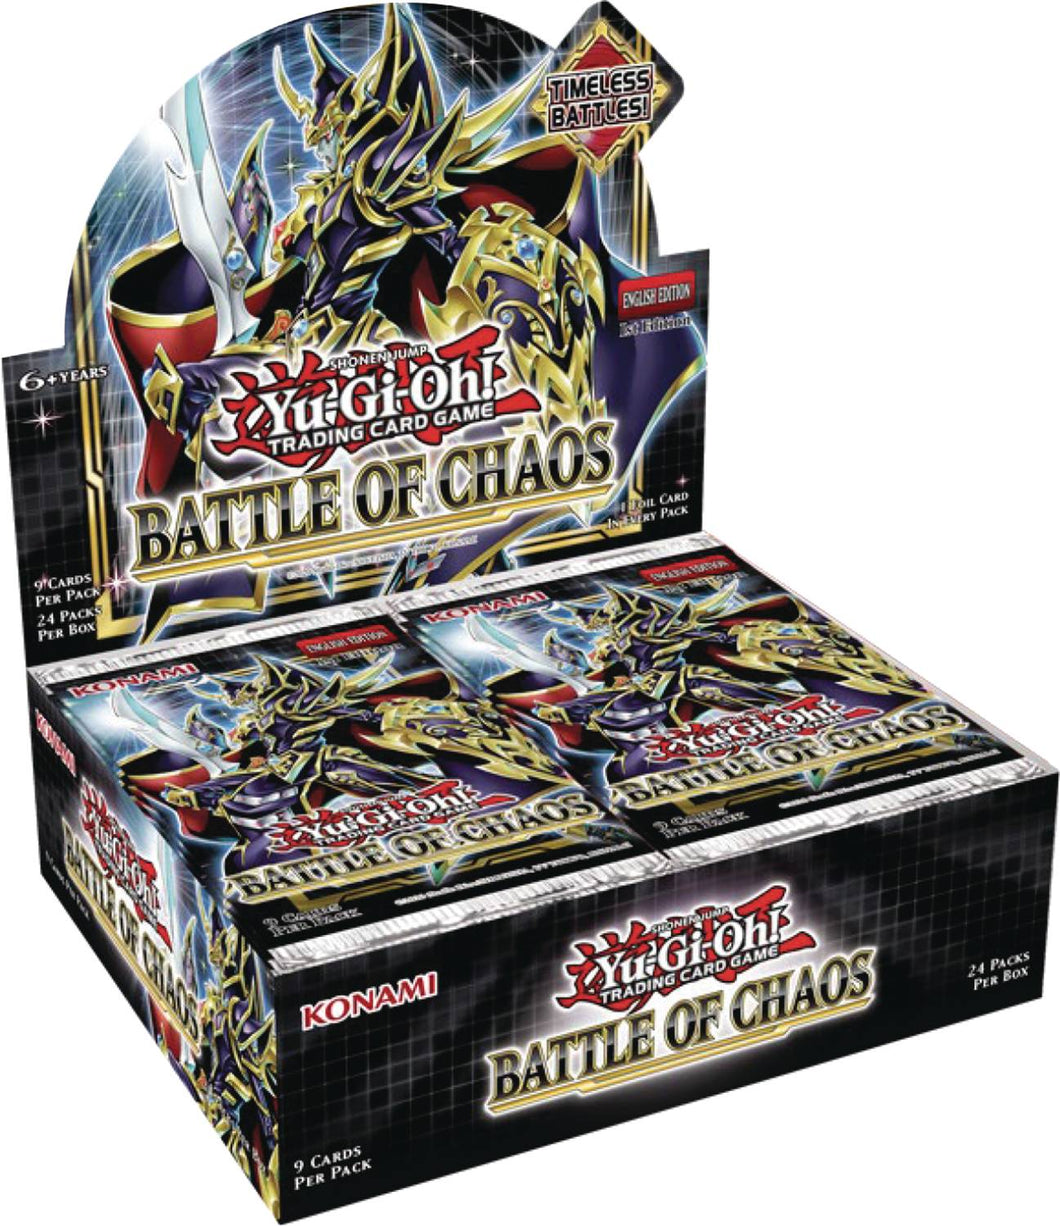 Yu-Gi-Oh! Battle of Chaos Booster Box (24 packs per box, 9 cards per pack)